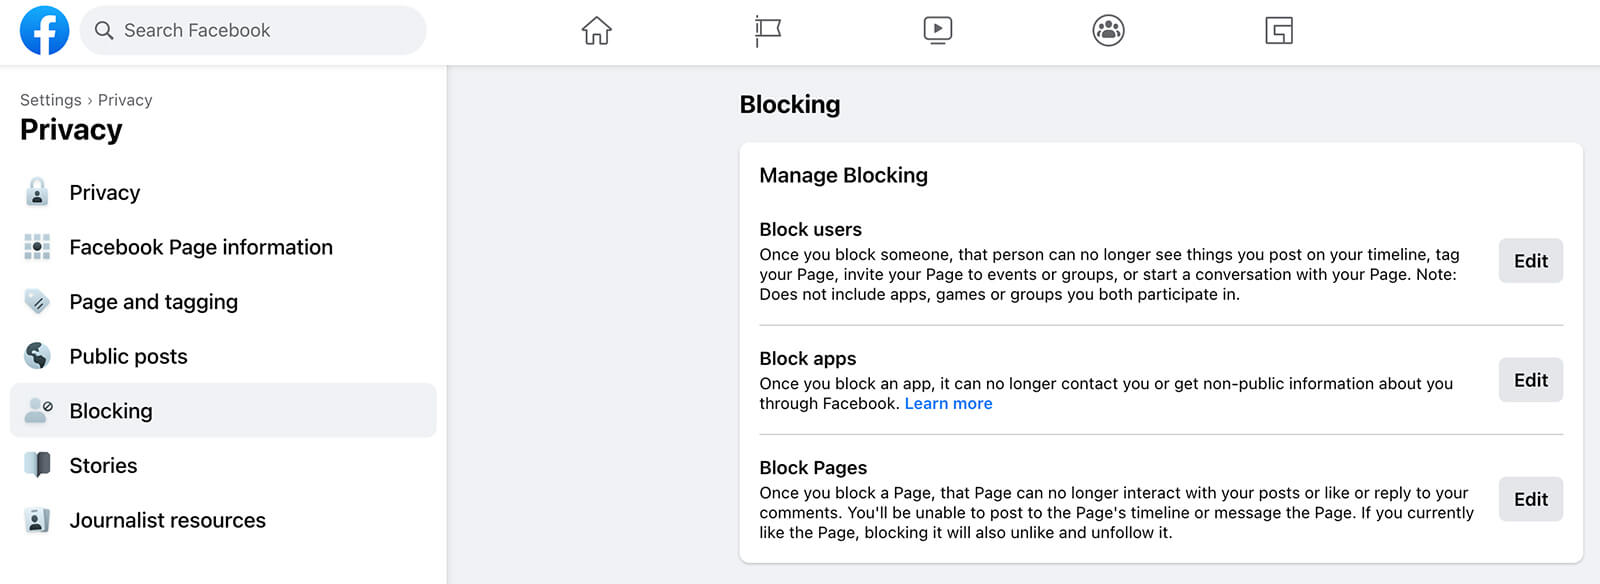 how-to-moderate-facebook-page-conversations-meta-tools-ad-comments-page-privacy-blocking-step-20